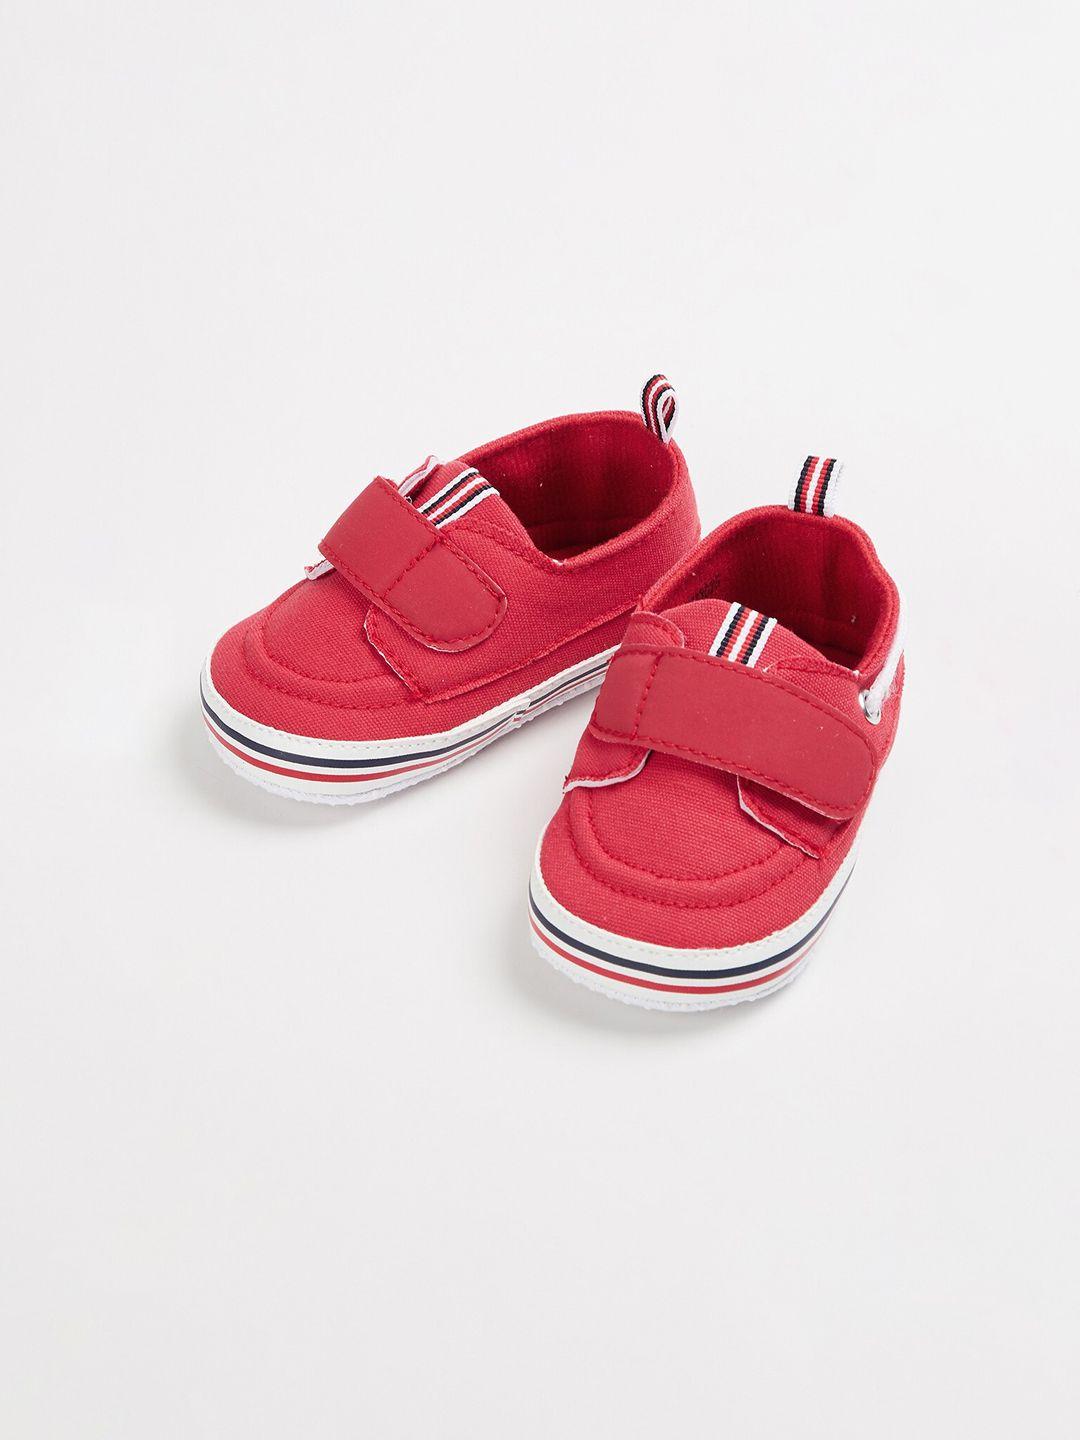 fame-forever-by-lifestyle-boys-red-solid-sneakers